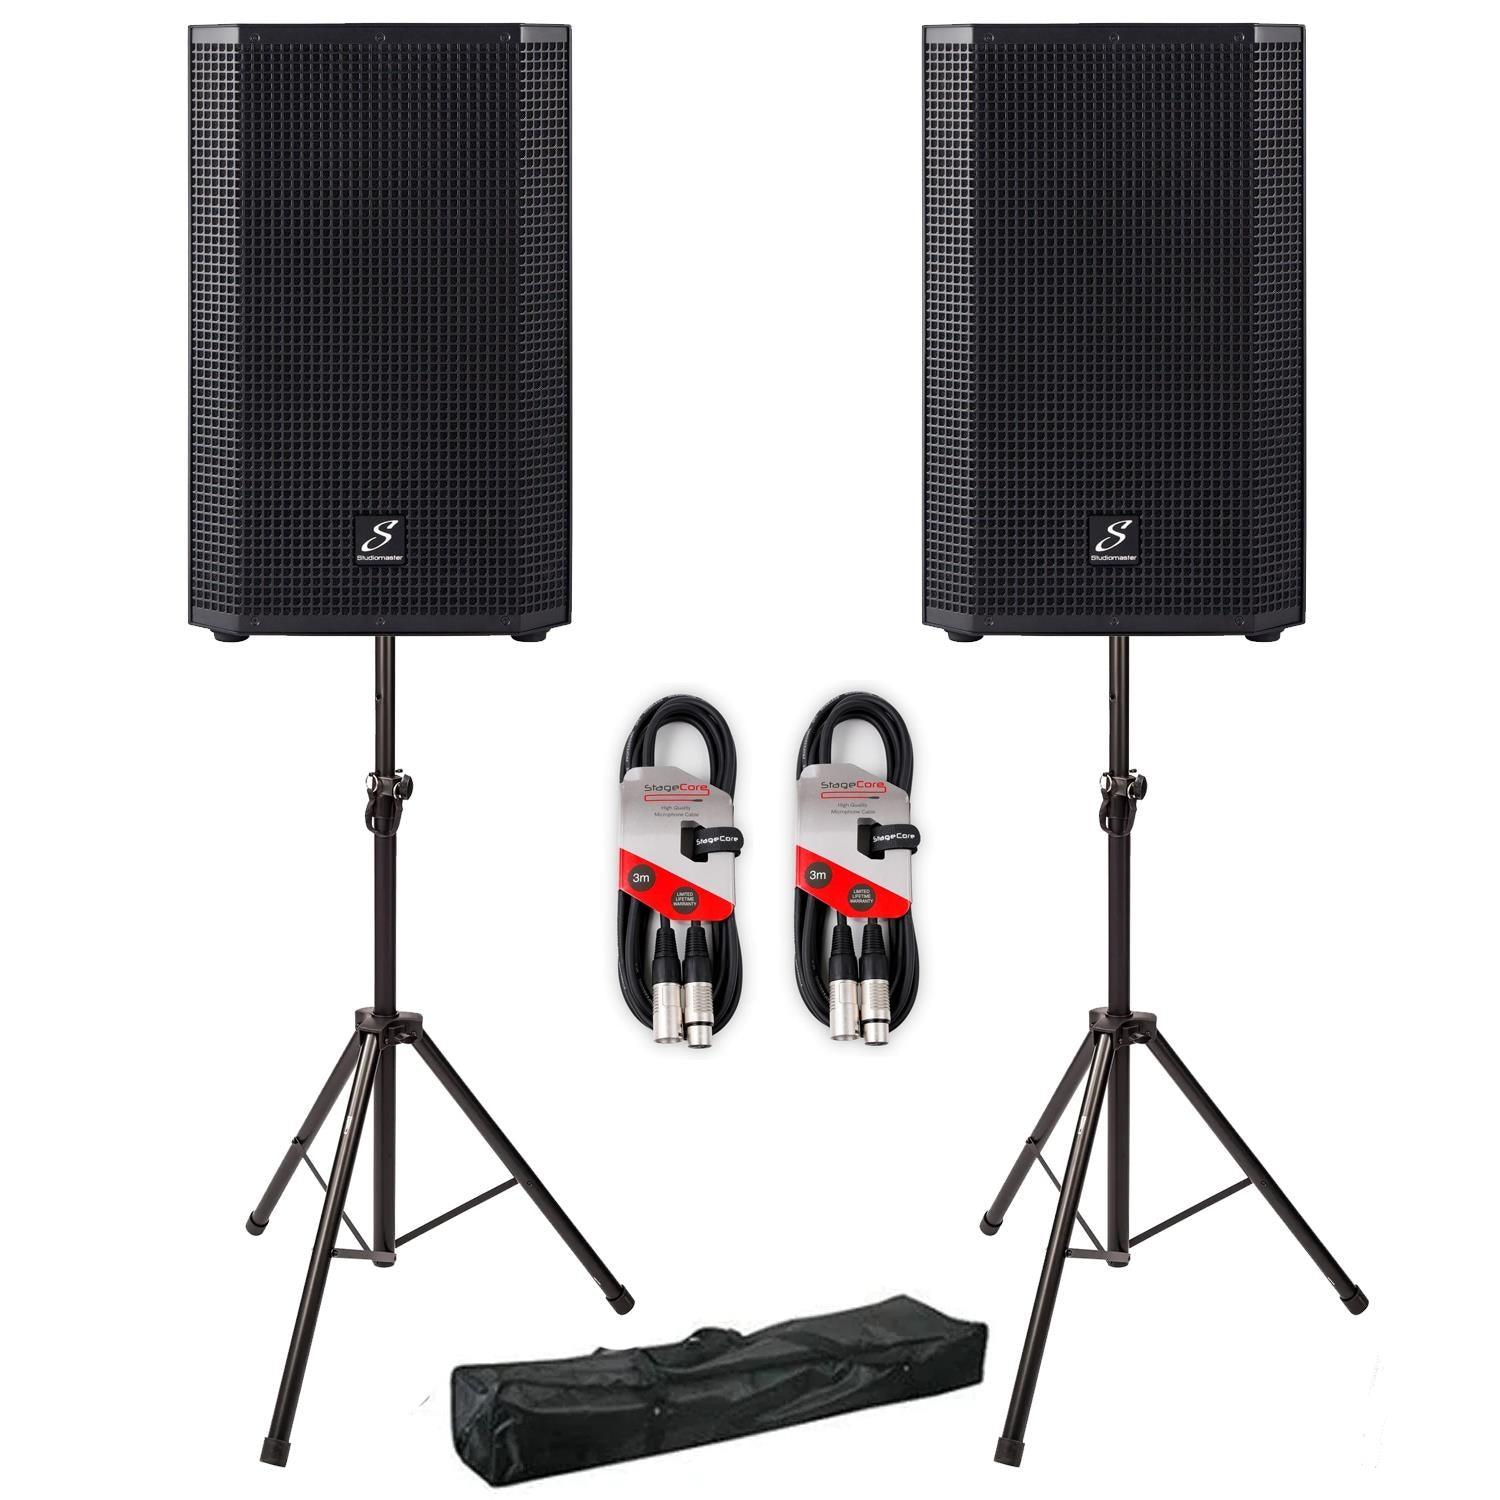 2 x Studiomaster Vortex 12A 12" Active Speaker with Stands & Cables - DY Pro Audio